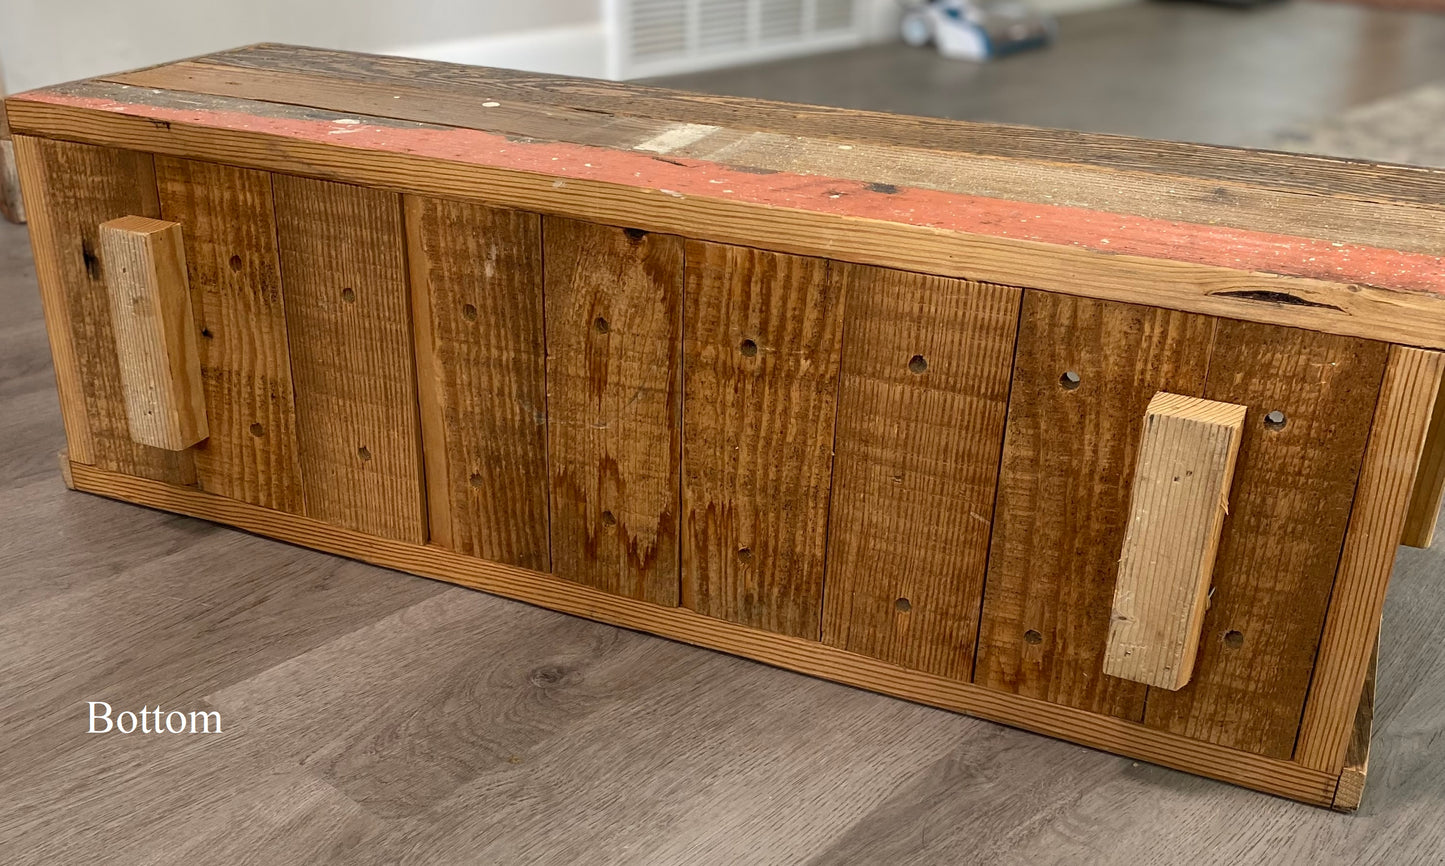 Reclaimed Wood Planter Box with Orange Paint Accents